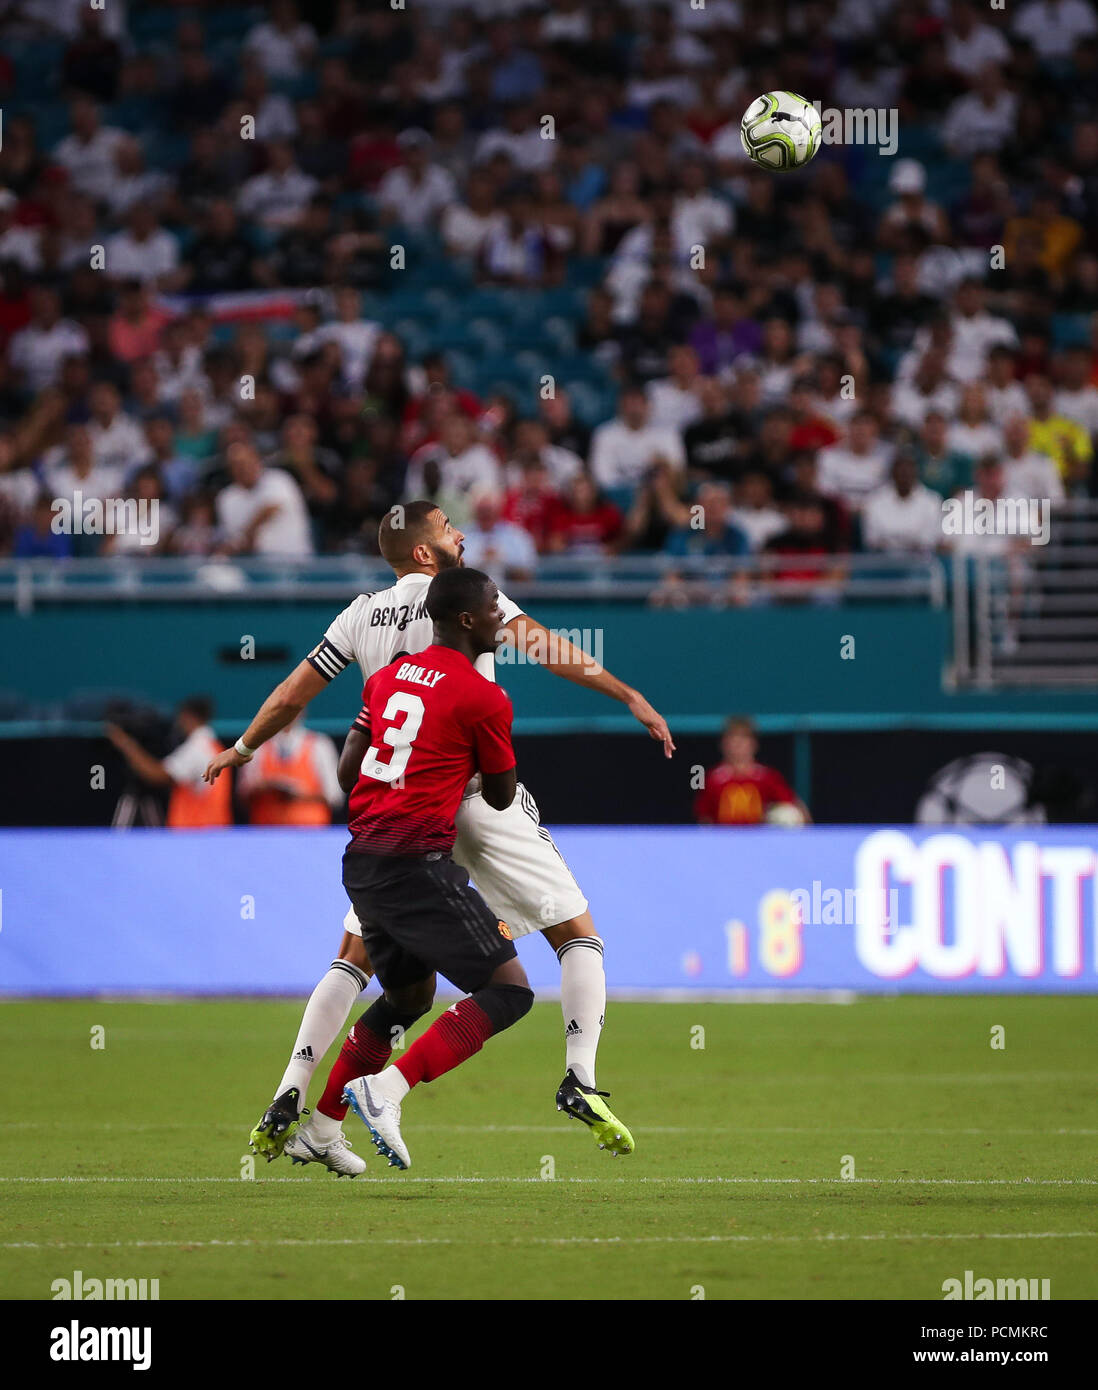 Miami Gardens, Florida, USA. 31st July, 2018. Real Madrid C.F. forward Karim Mostafa Benzema (9) and Manchester United F.C. defender Eric Bailly (3) anticipate a header during an International Champions Cup match between Real Madrid C.F. and Manchester United F.C. at the Hard Rock Stadium in Miami Gardens, Florida. Manchester United F.C. won the game 2-1. Credit: Mario Houben/ZUMA Wire/Alamy Live News Stock Photo